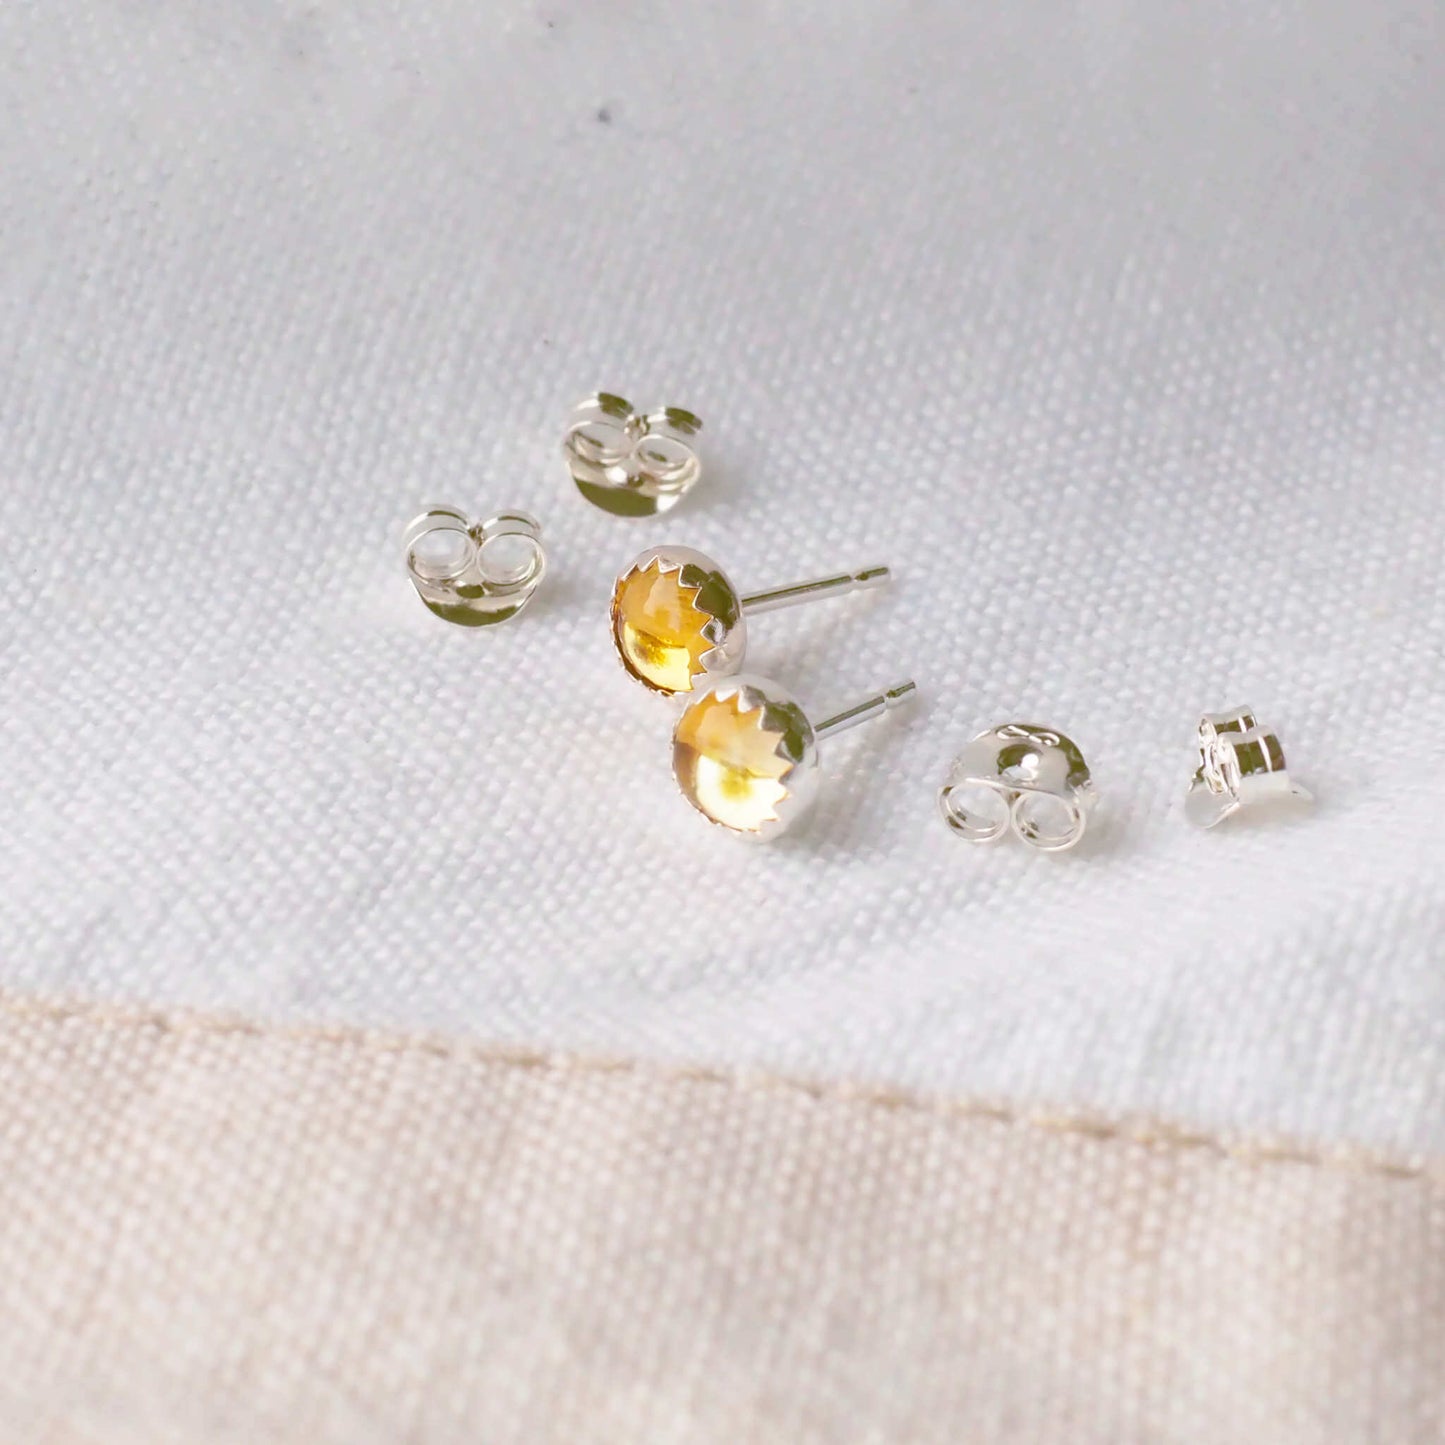 Beautifully simple modern gemstone stud earrings with a warm yellow round citrine set by hand into a modern minimalist sterling silver surround, sitting with earring backs on a linen cloth.The earrings are 5mm in size, round and come with butterfly backs.Citrine is the birthstone for November. These stud earrings are handcrafted by a small business in Scotland UK by designer jeweller Maram Jewellery